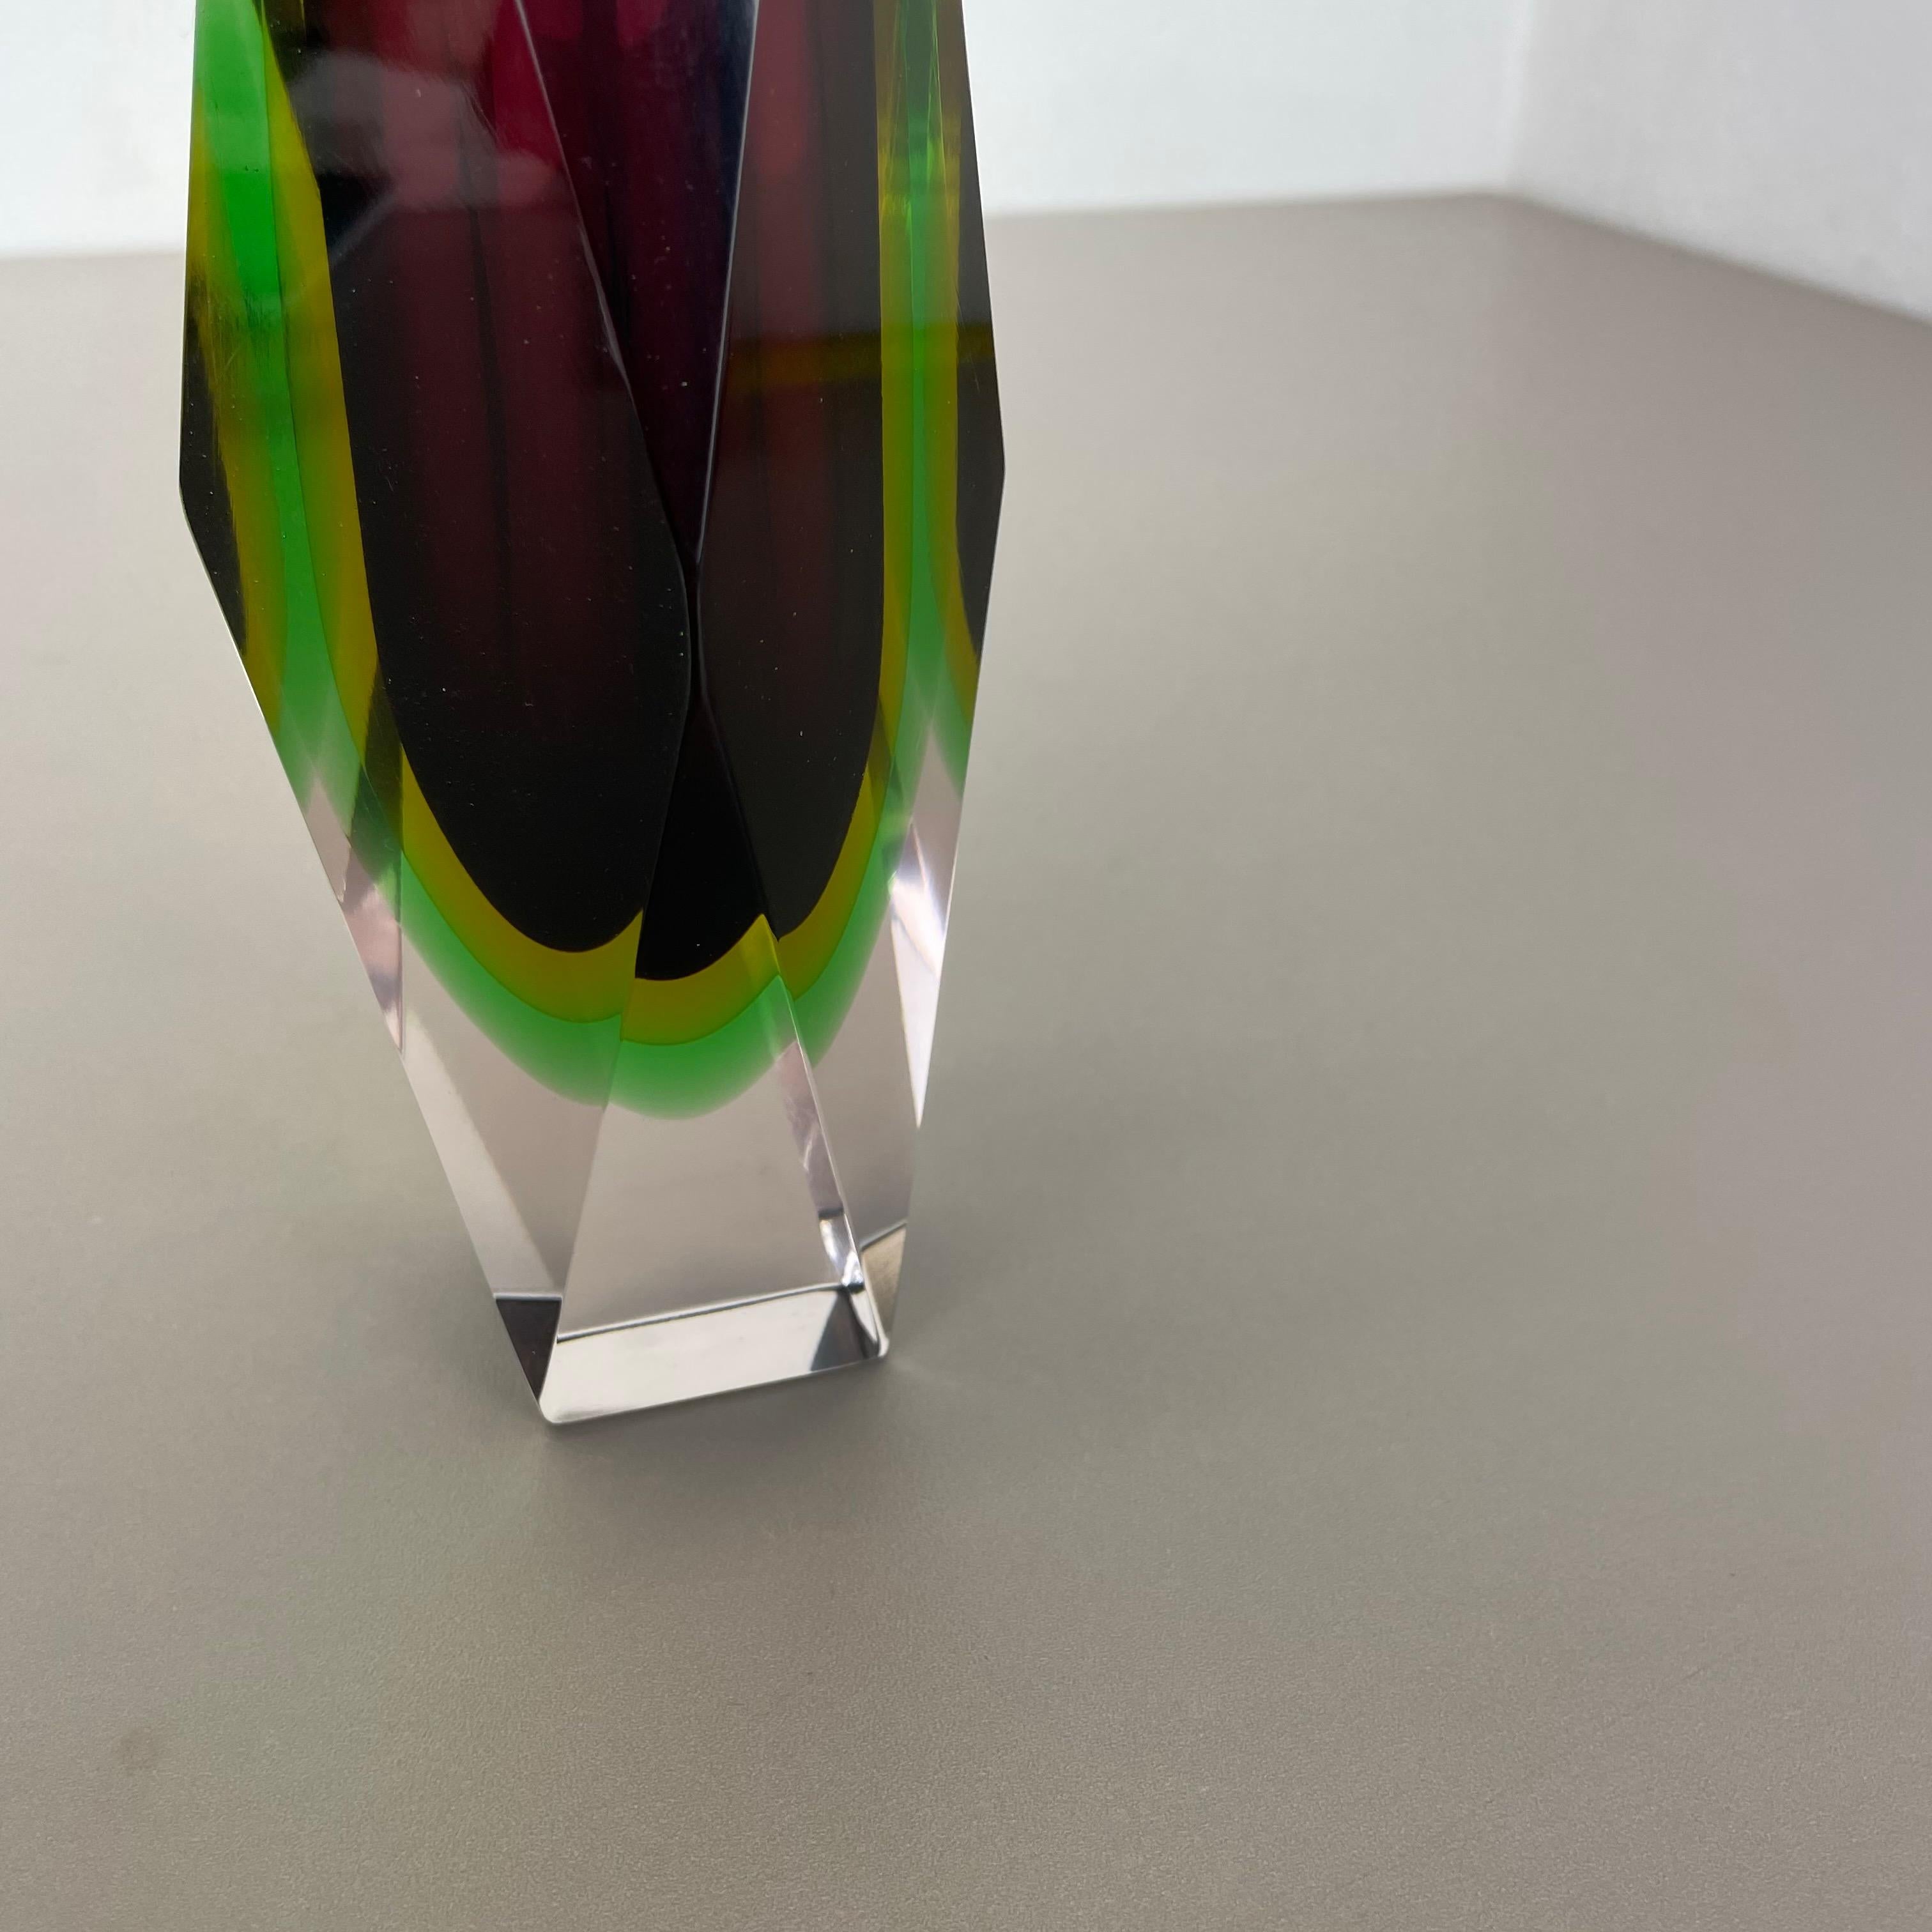 Heavy Large Murano Glass Sommerso 4 Colors Vase by Flavio Poli, Italy, 1970s For Sale 6